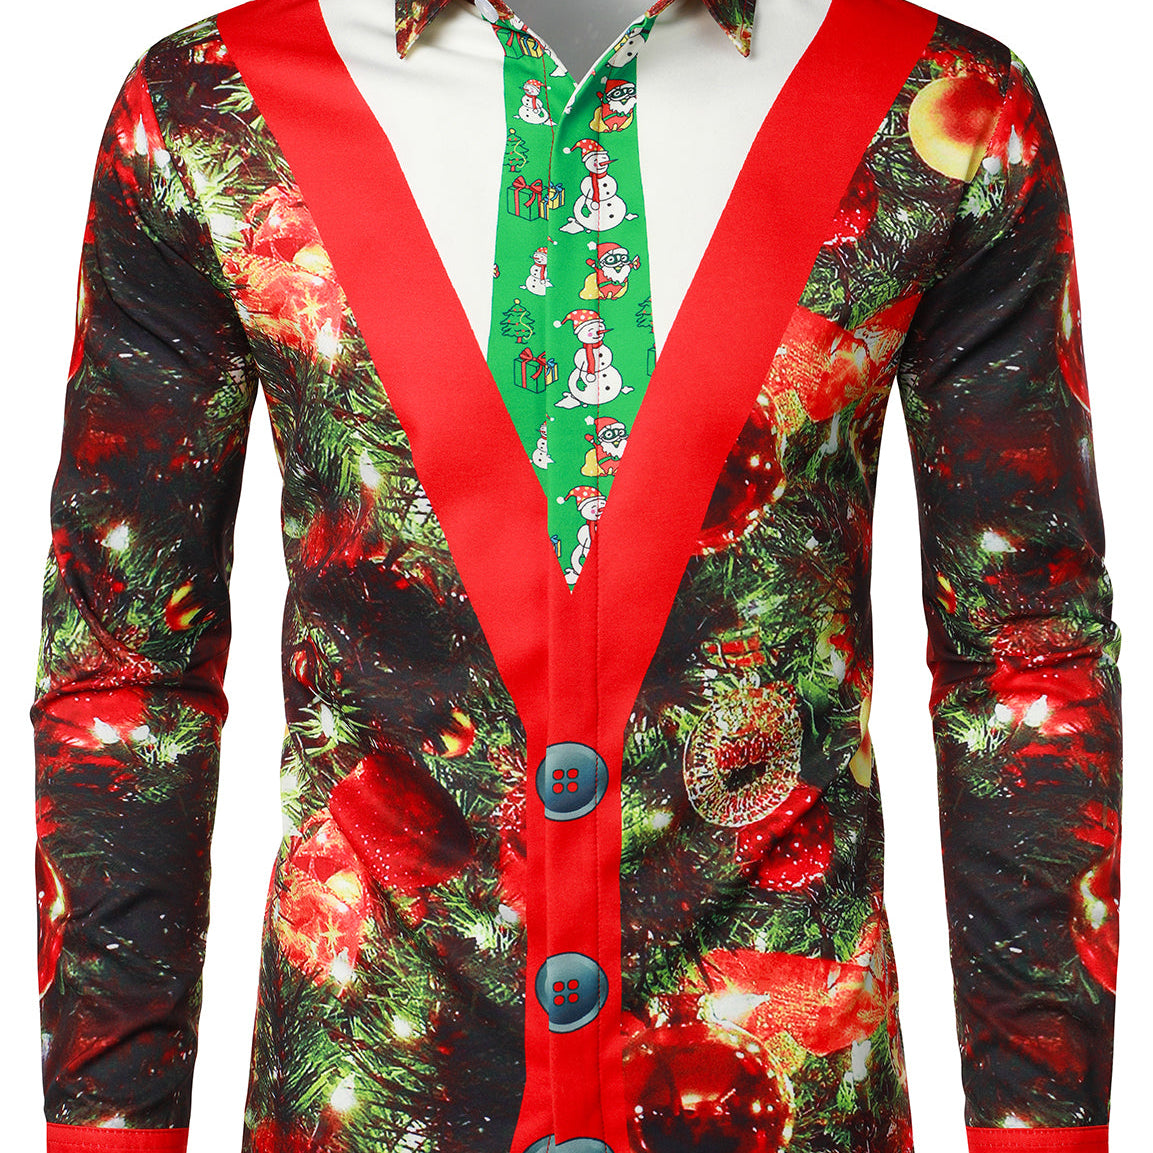 Men's Christmas Decoration Funny Button Up Long Sleeve Shirt